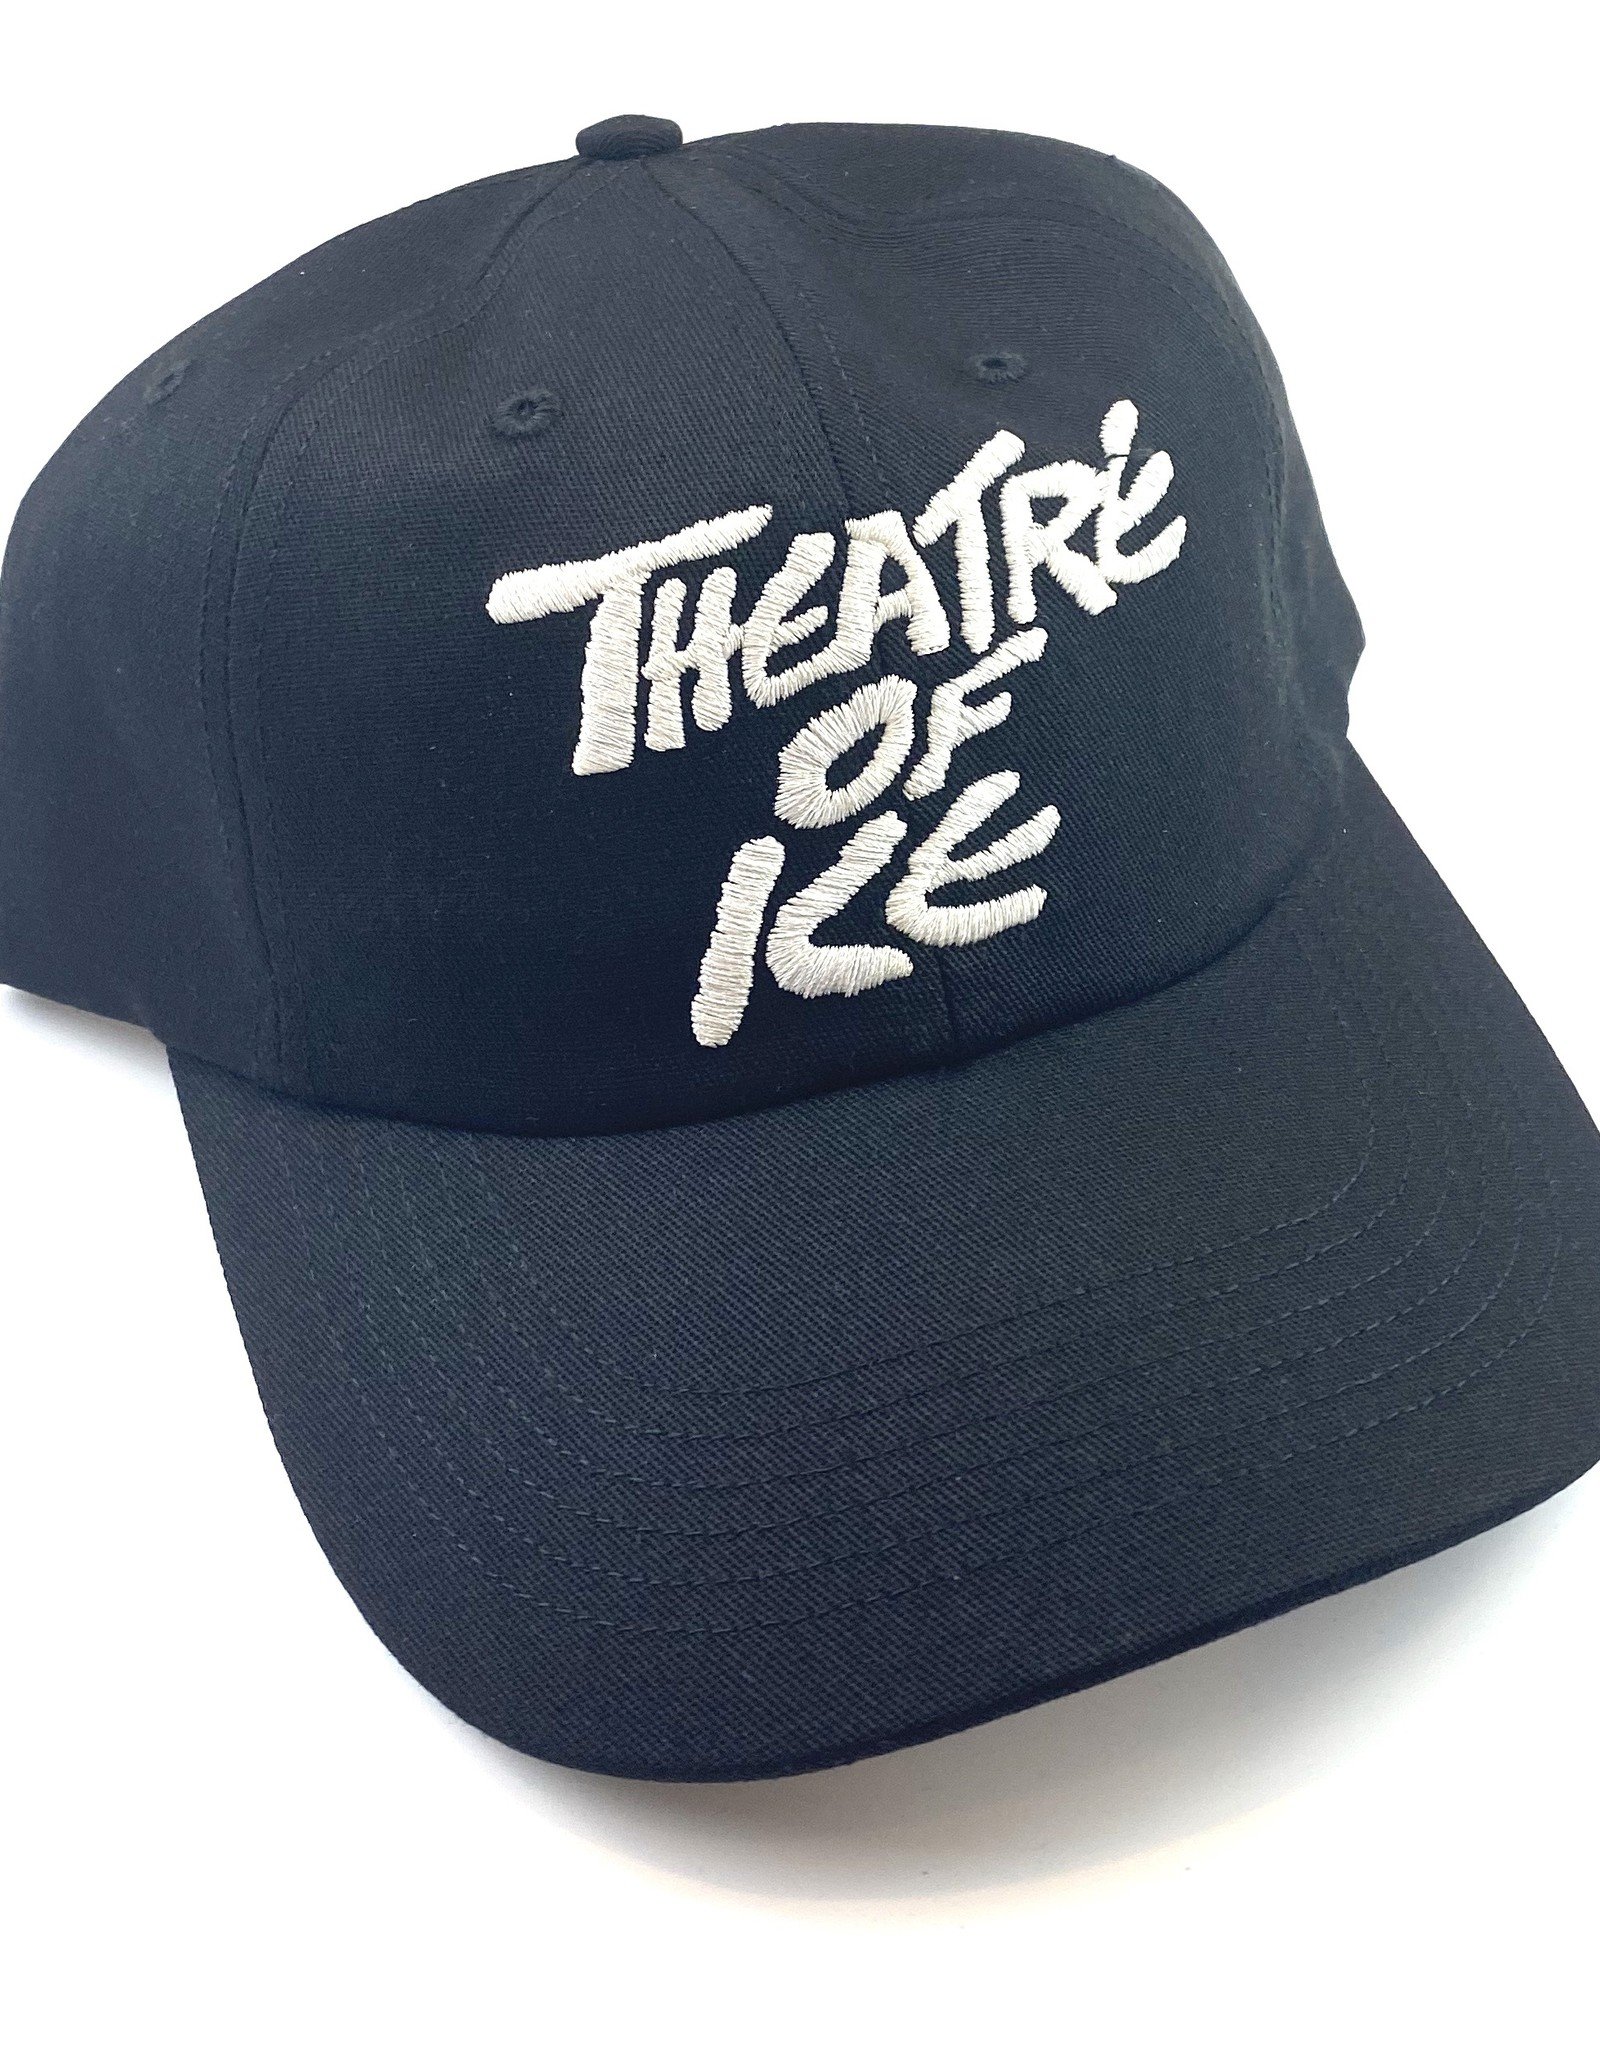 HOCKEY THEATRE OF ICE 5 PANEL HAT - (ALL COLORS)